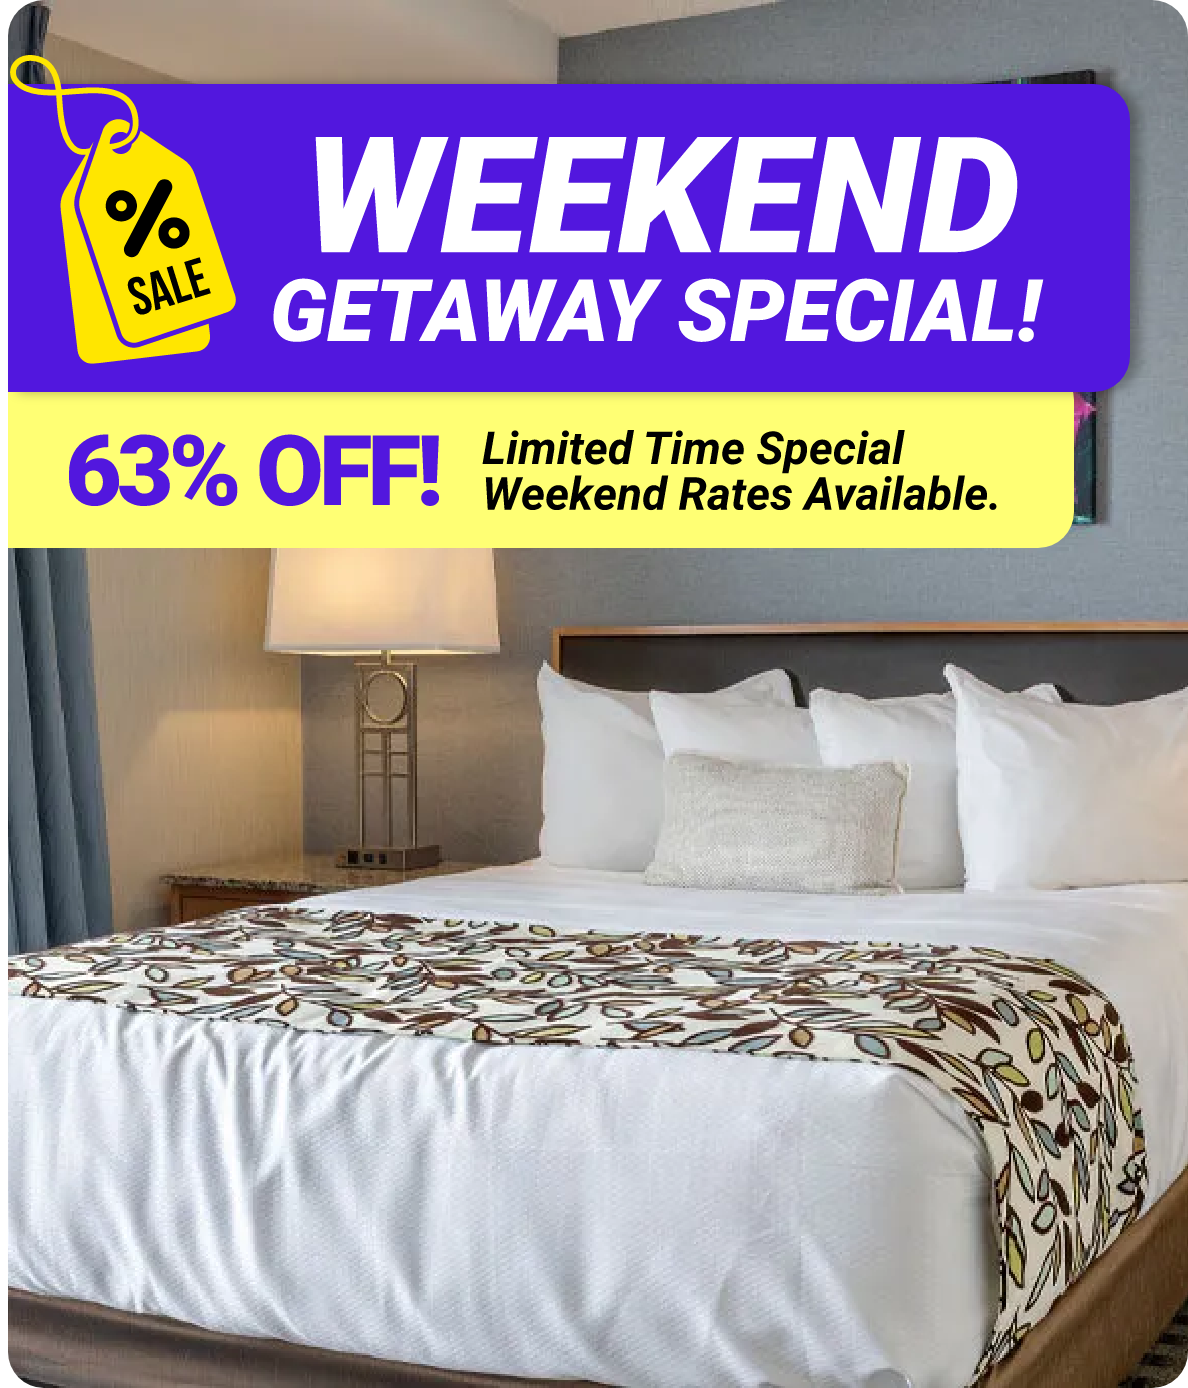 Weekend Getaway Special! 63% OFF! Limited Time Special Weekend Rates Available.